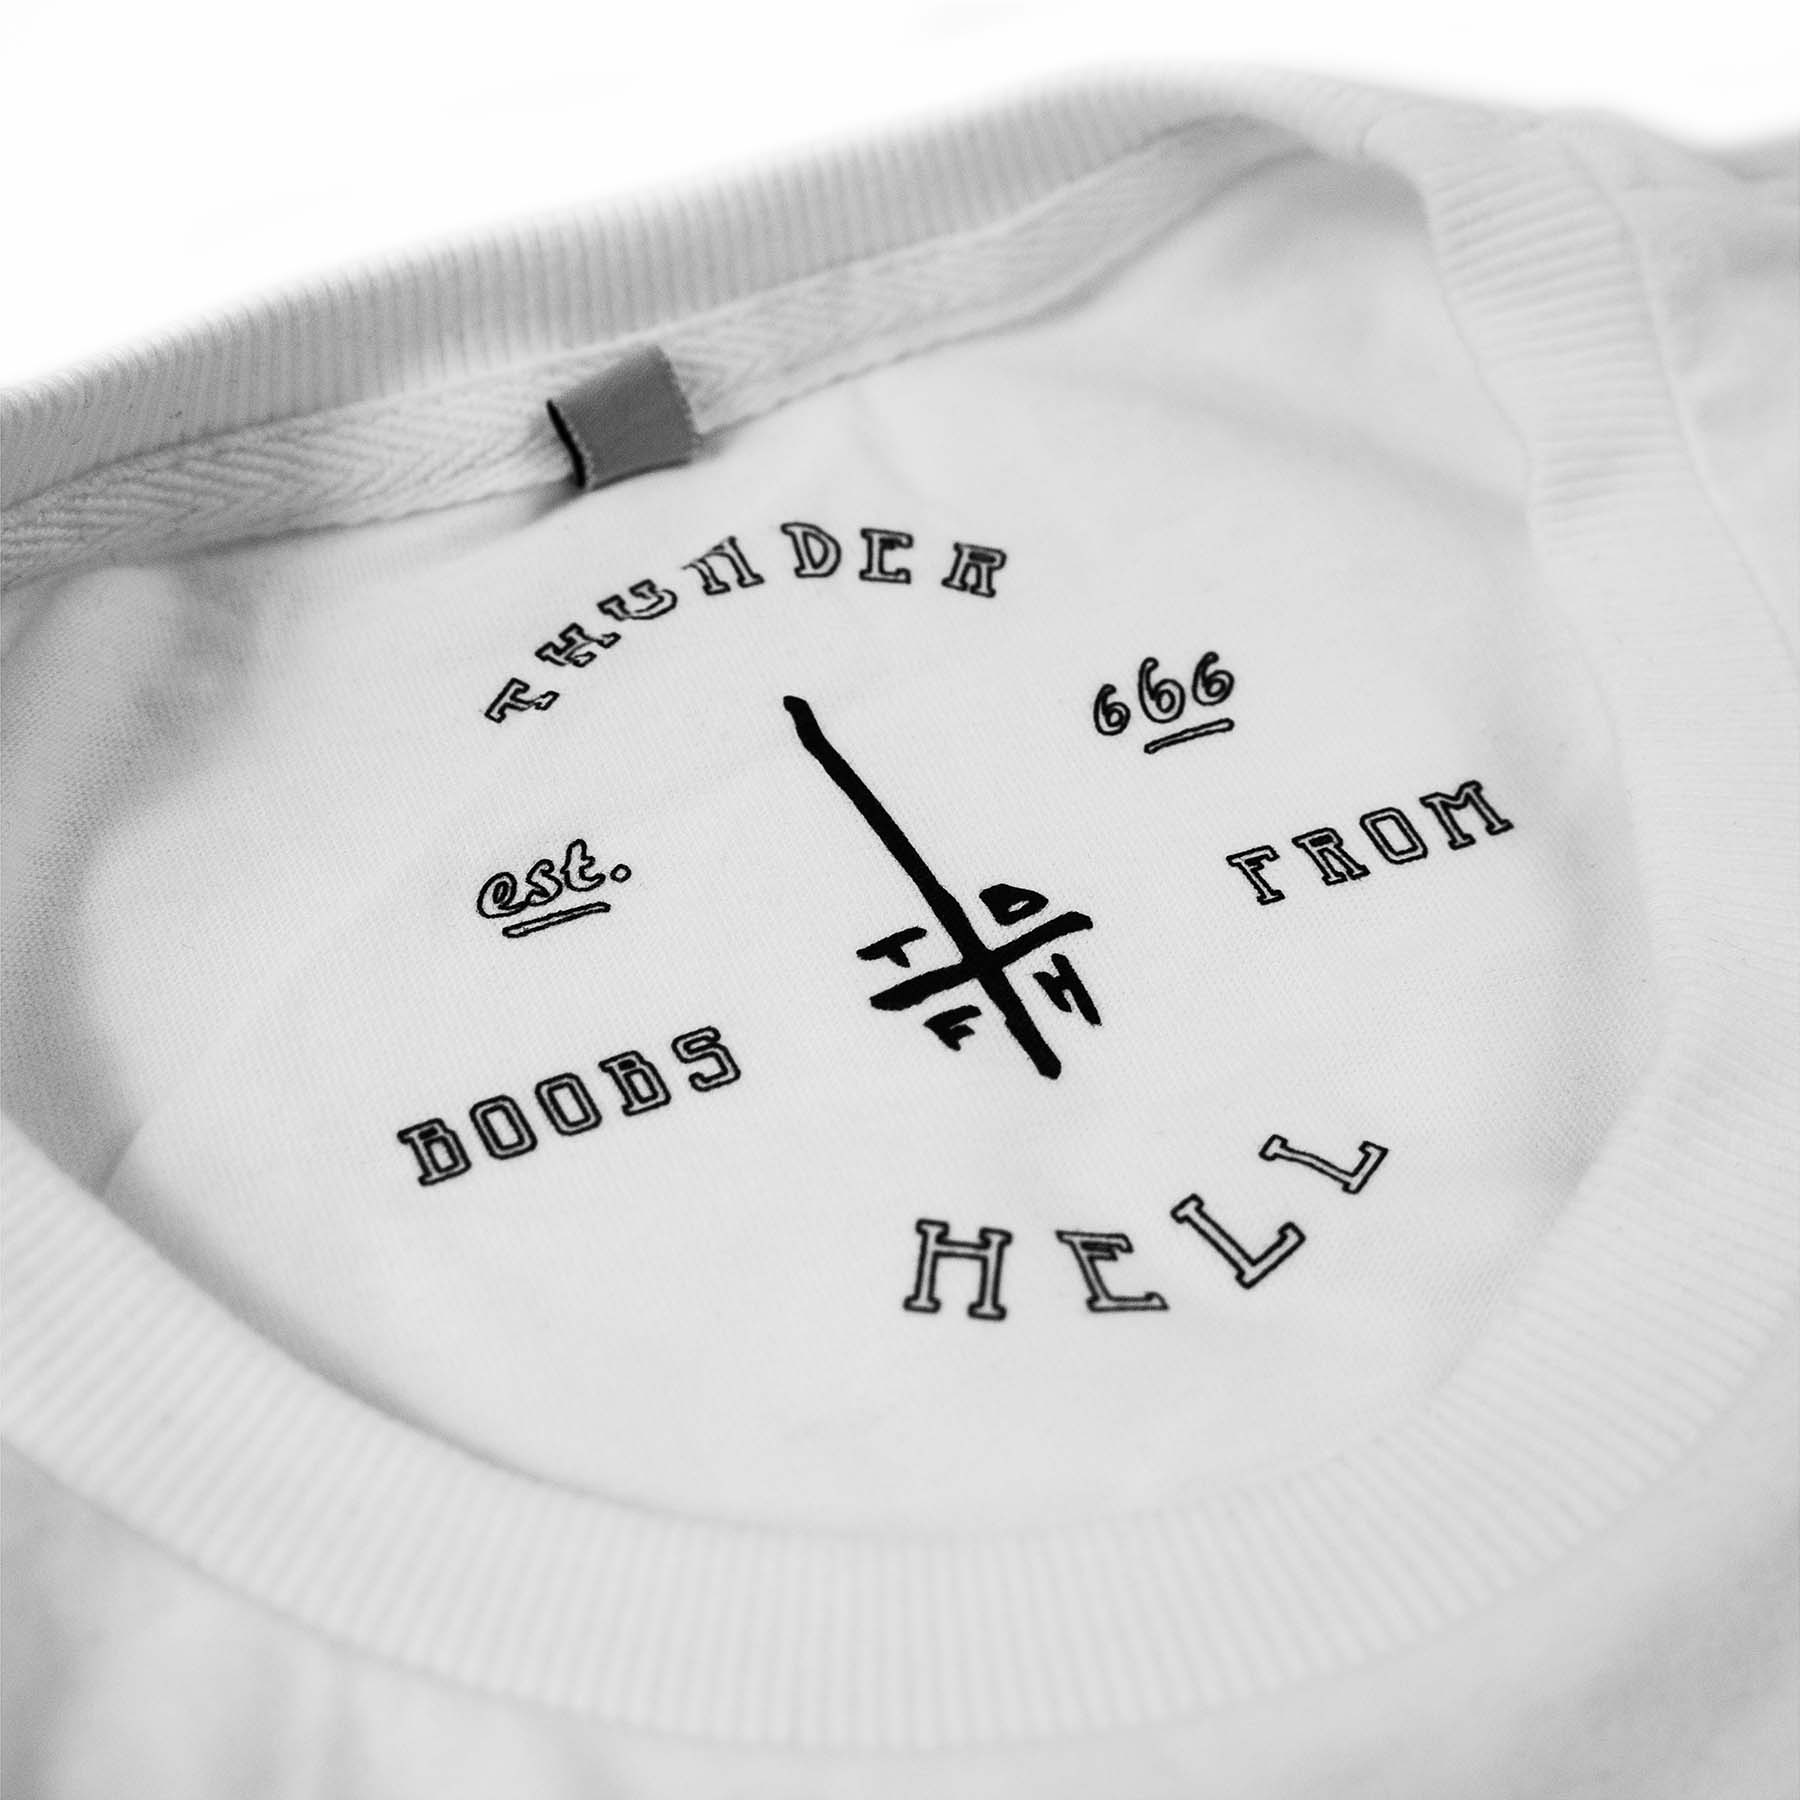 Close up of the black neck printing saying " thunder boobs from hell and est. 666 with the tbfh logo in the middle" screen-printed on a white shirt